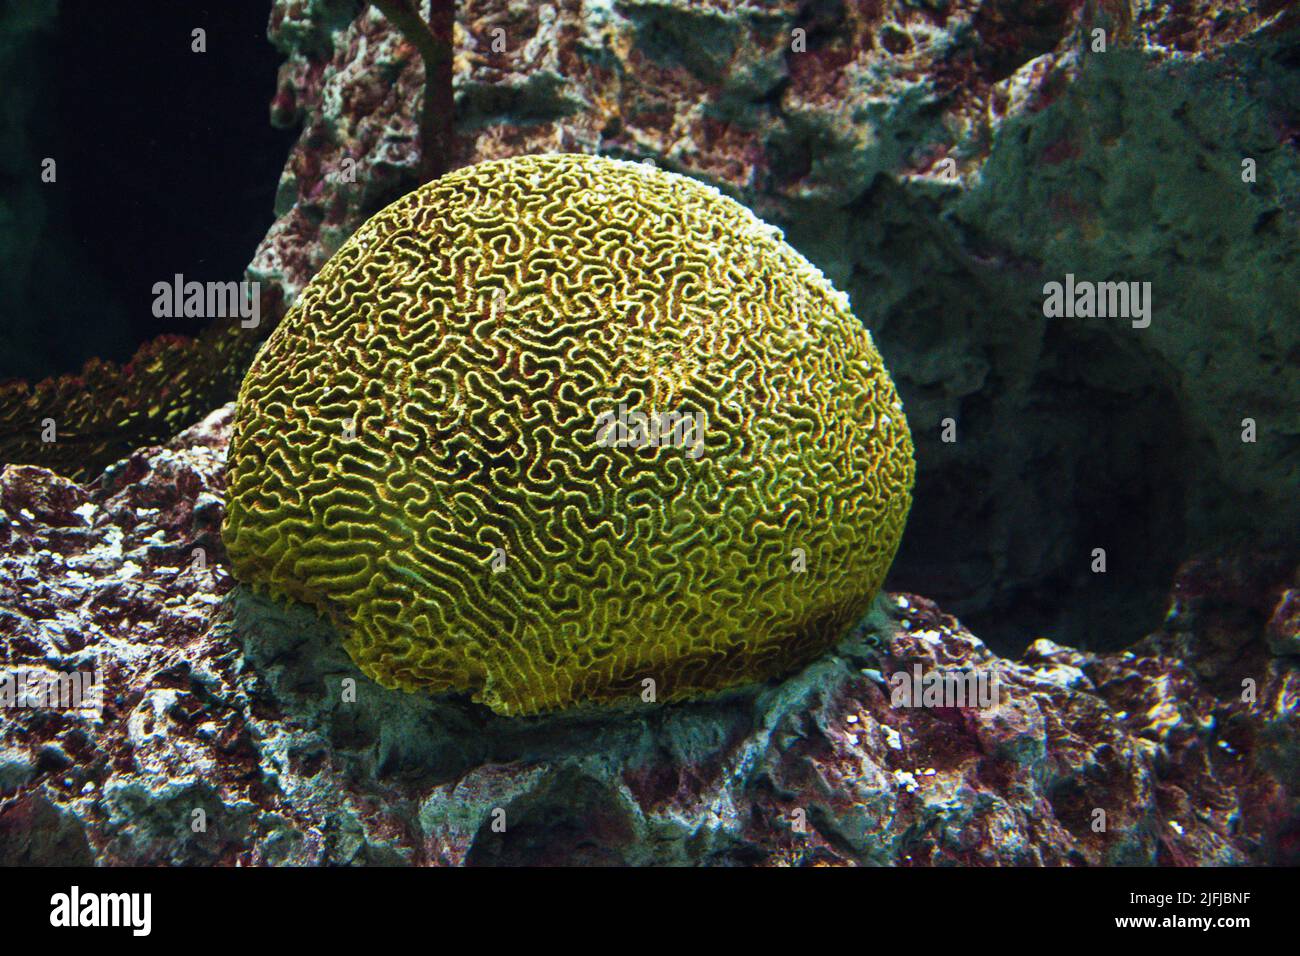 A yellow Brain coral with a red and white stone behind it. Stock Photo